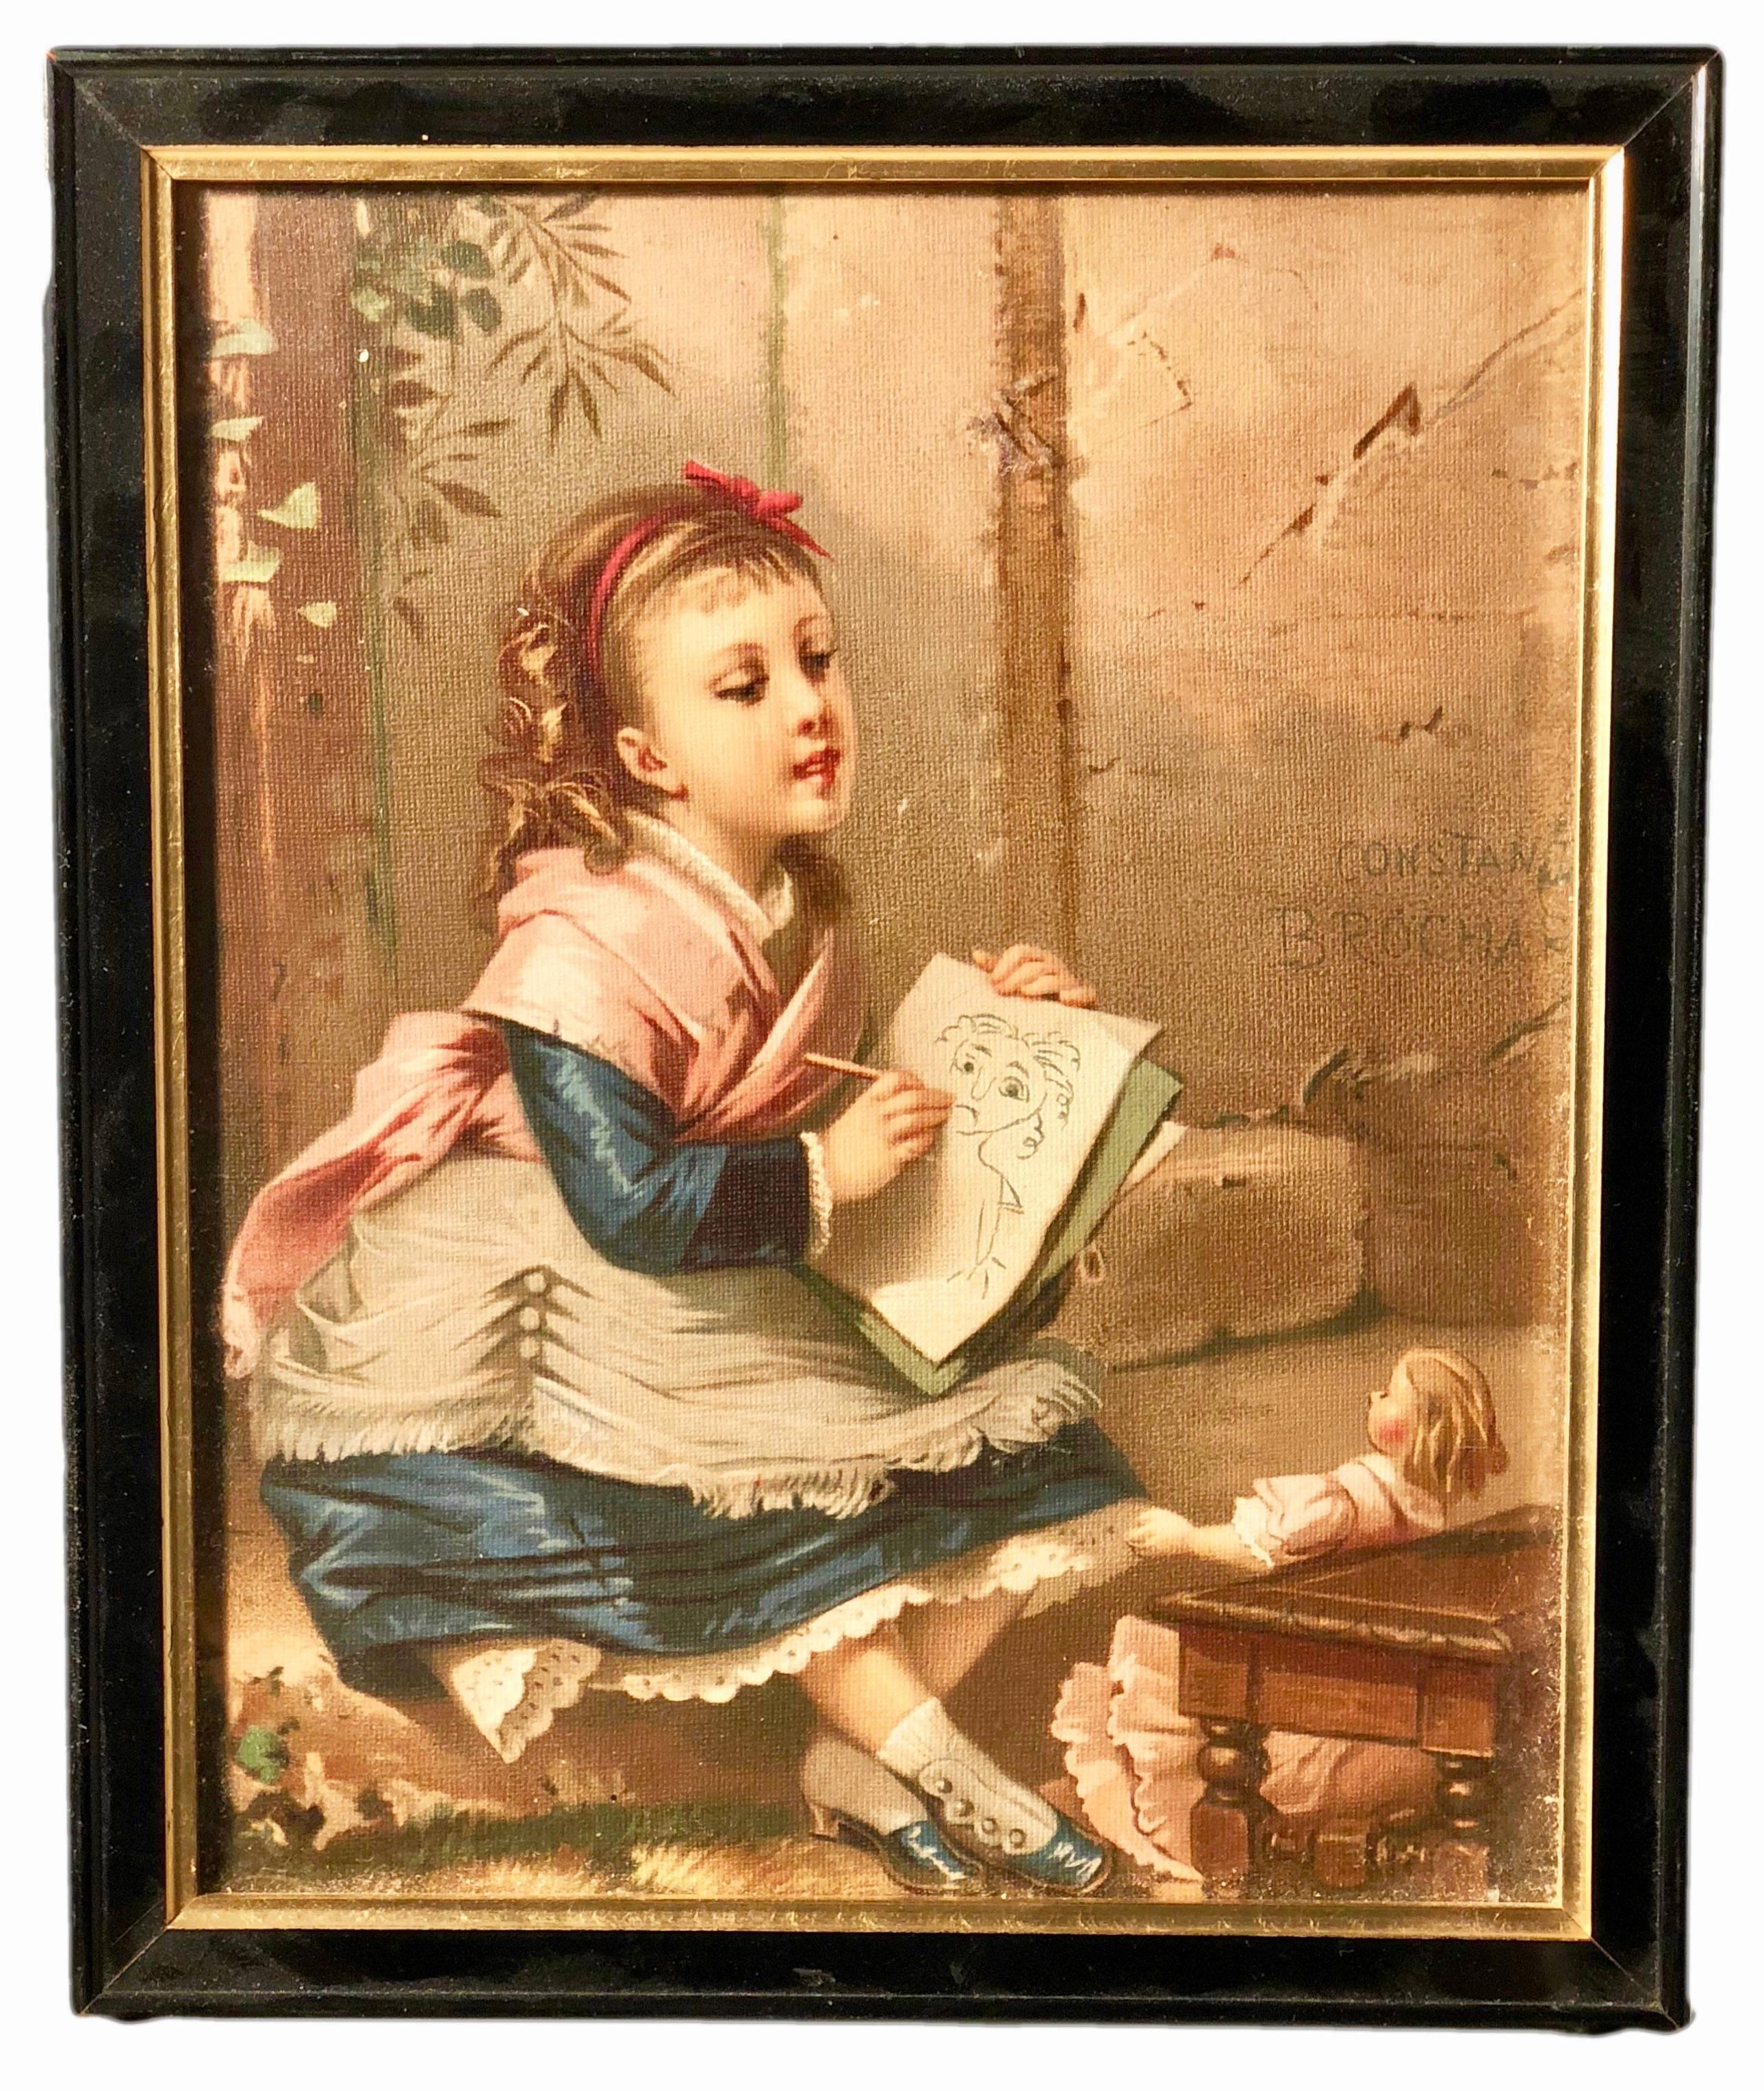 This is a charming set of three French framed lithographs of three young girls. One girl is drawing with her doll, another is feeding her pet berries and another is on her way to school. The colors are incredible as is the captured sentiment and